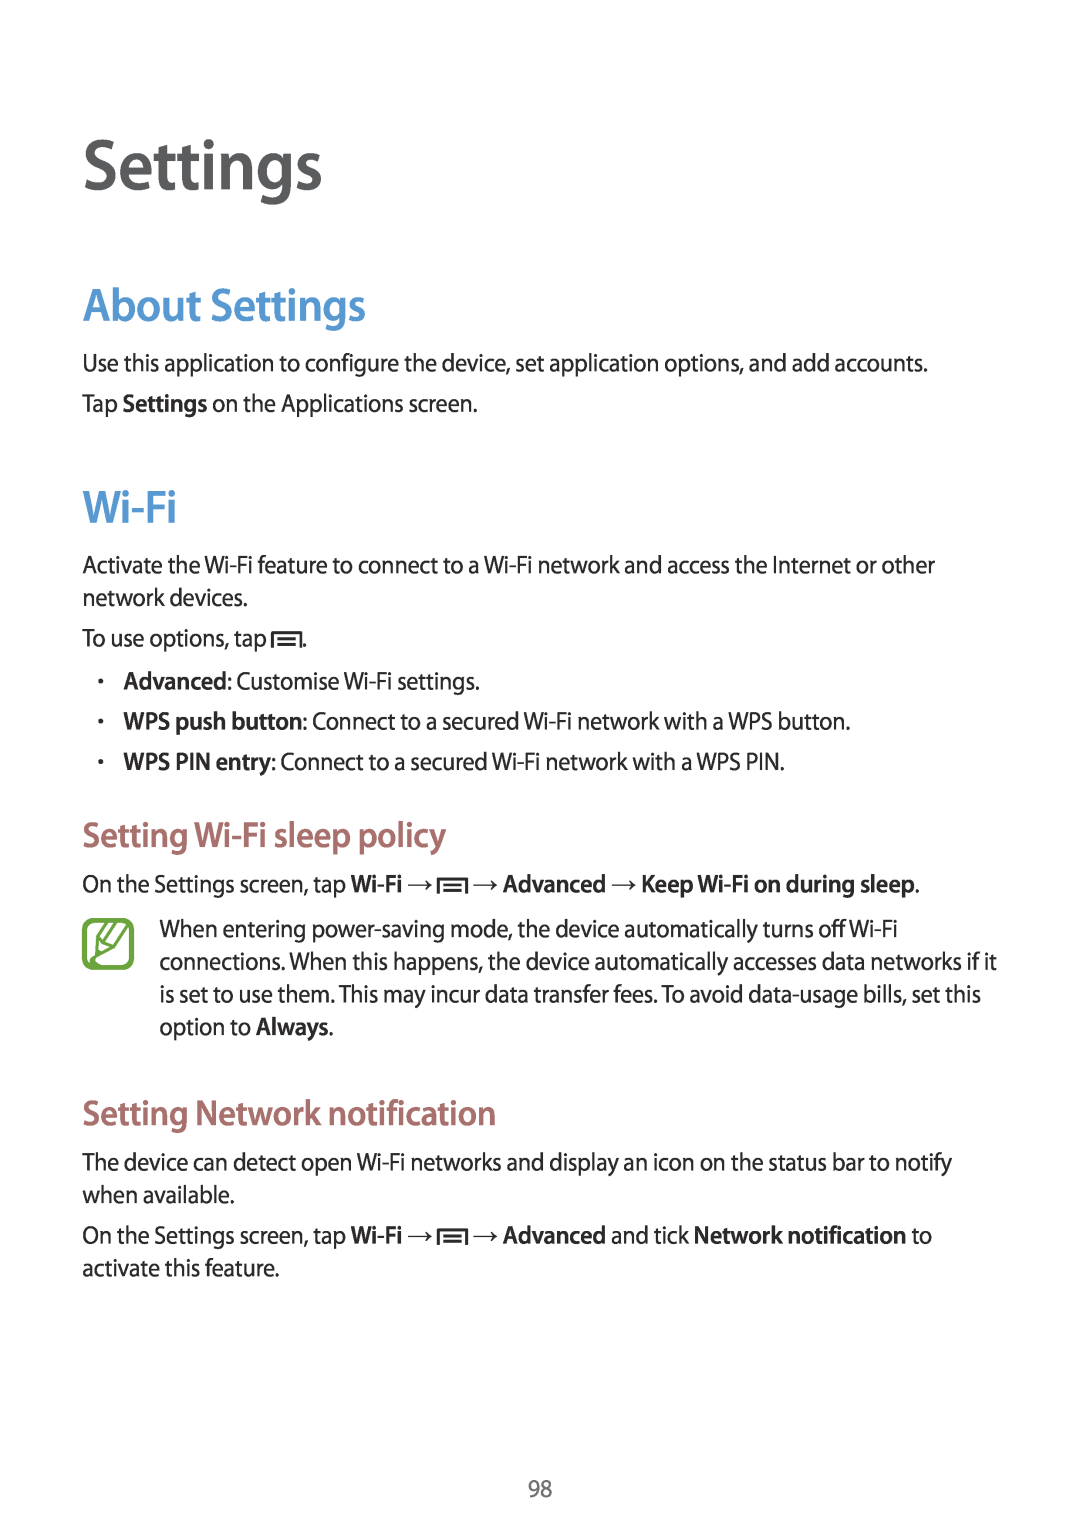 Samsung GT-I8730ZWAMEO, GT-I8730TAAVGR About Settings, Setting Wi-Fi sleep policy, Setting Network notification 